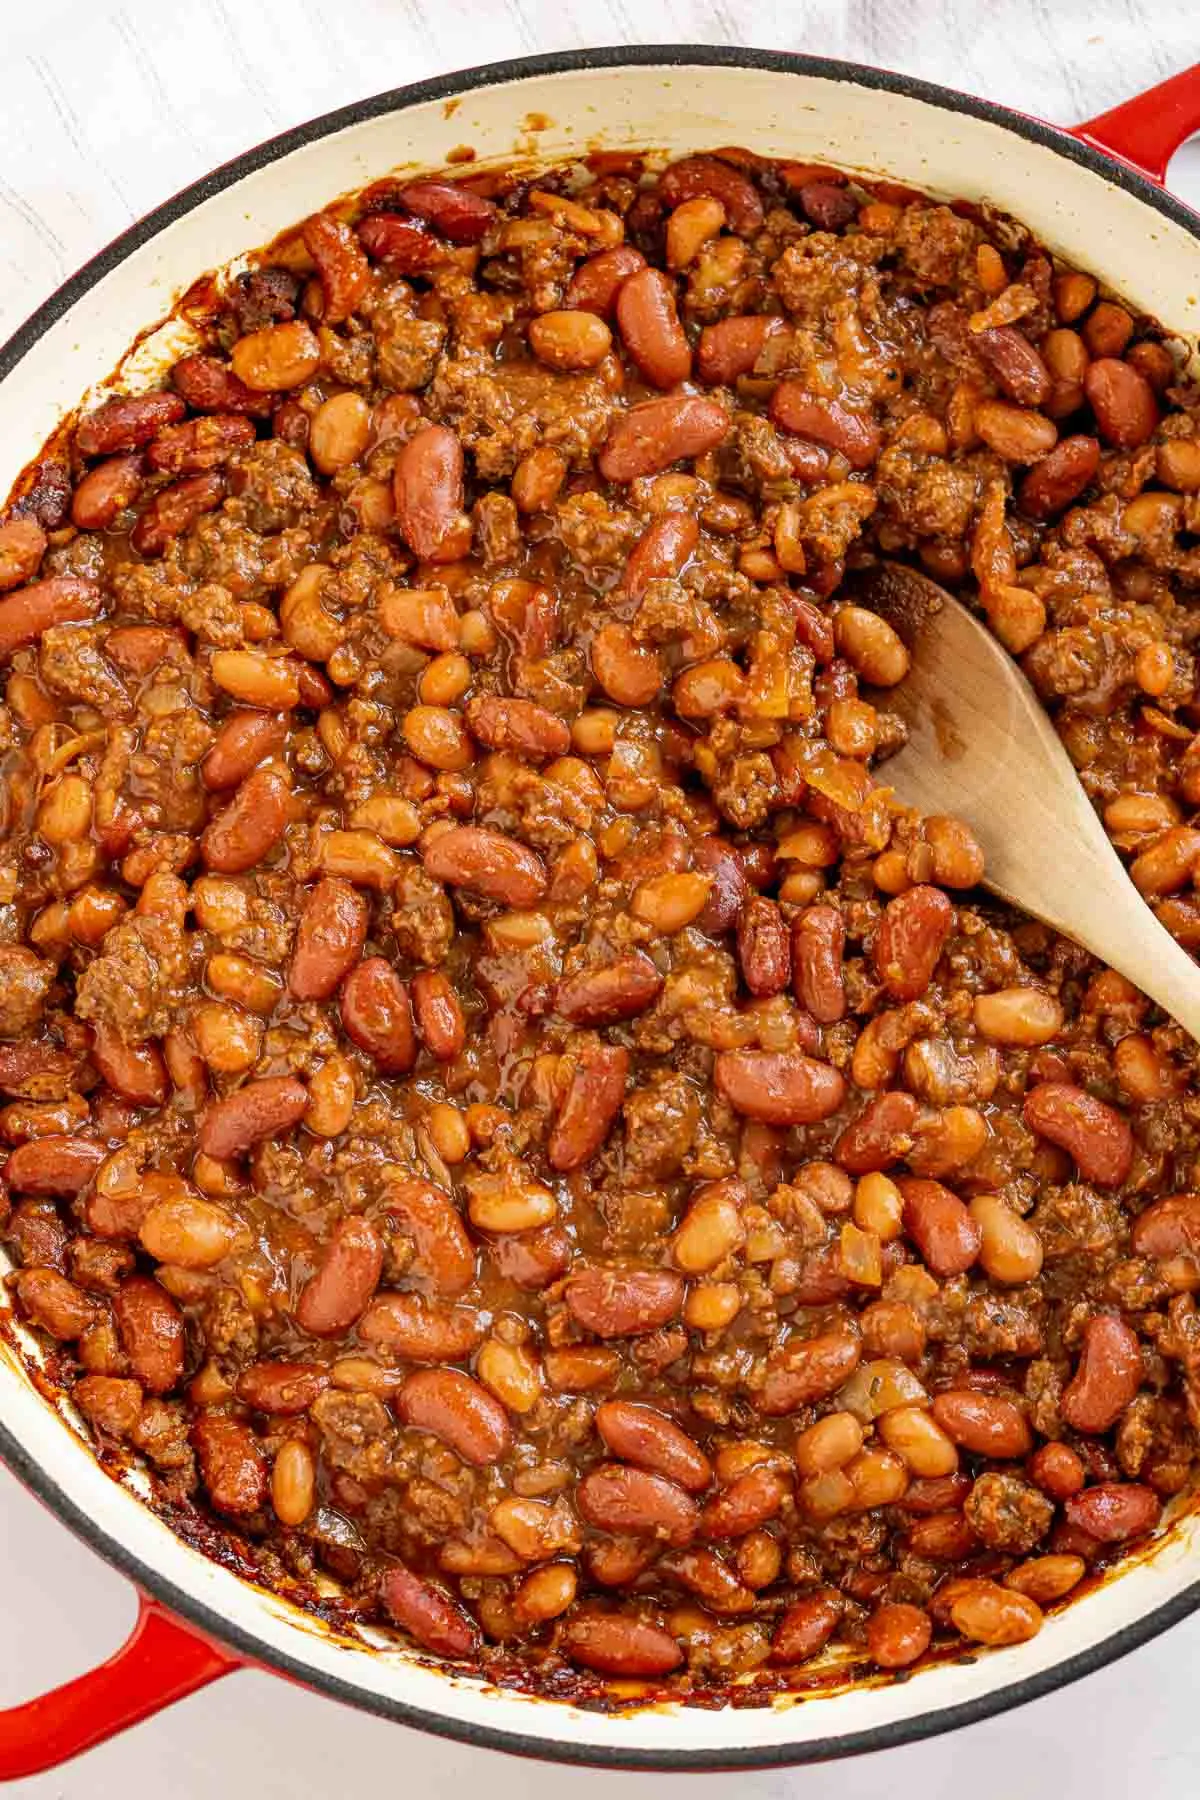 Wooden spoon in a pan of baked beans with ground beef.